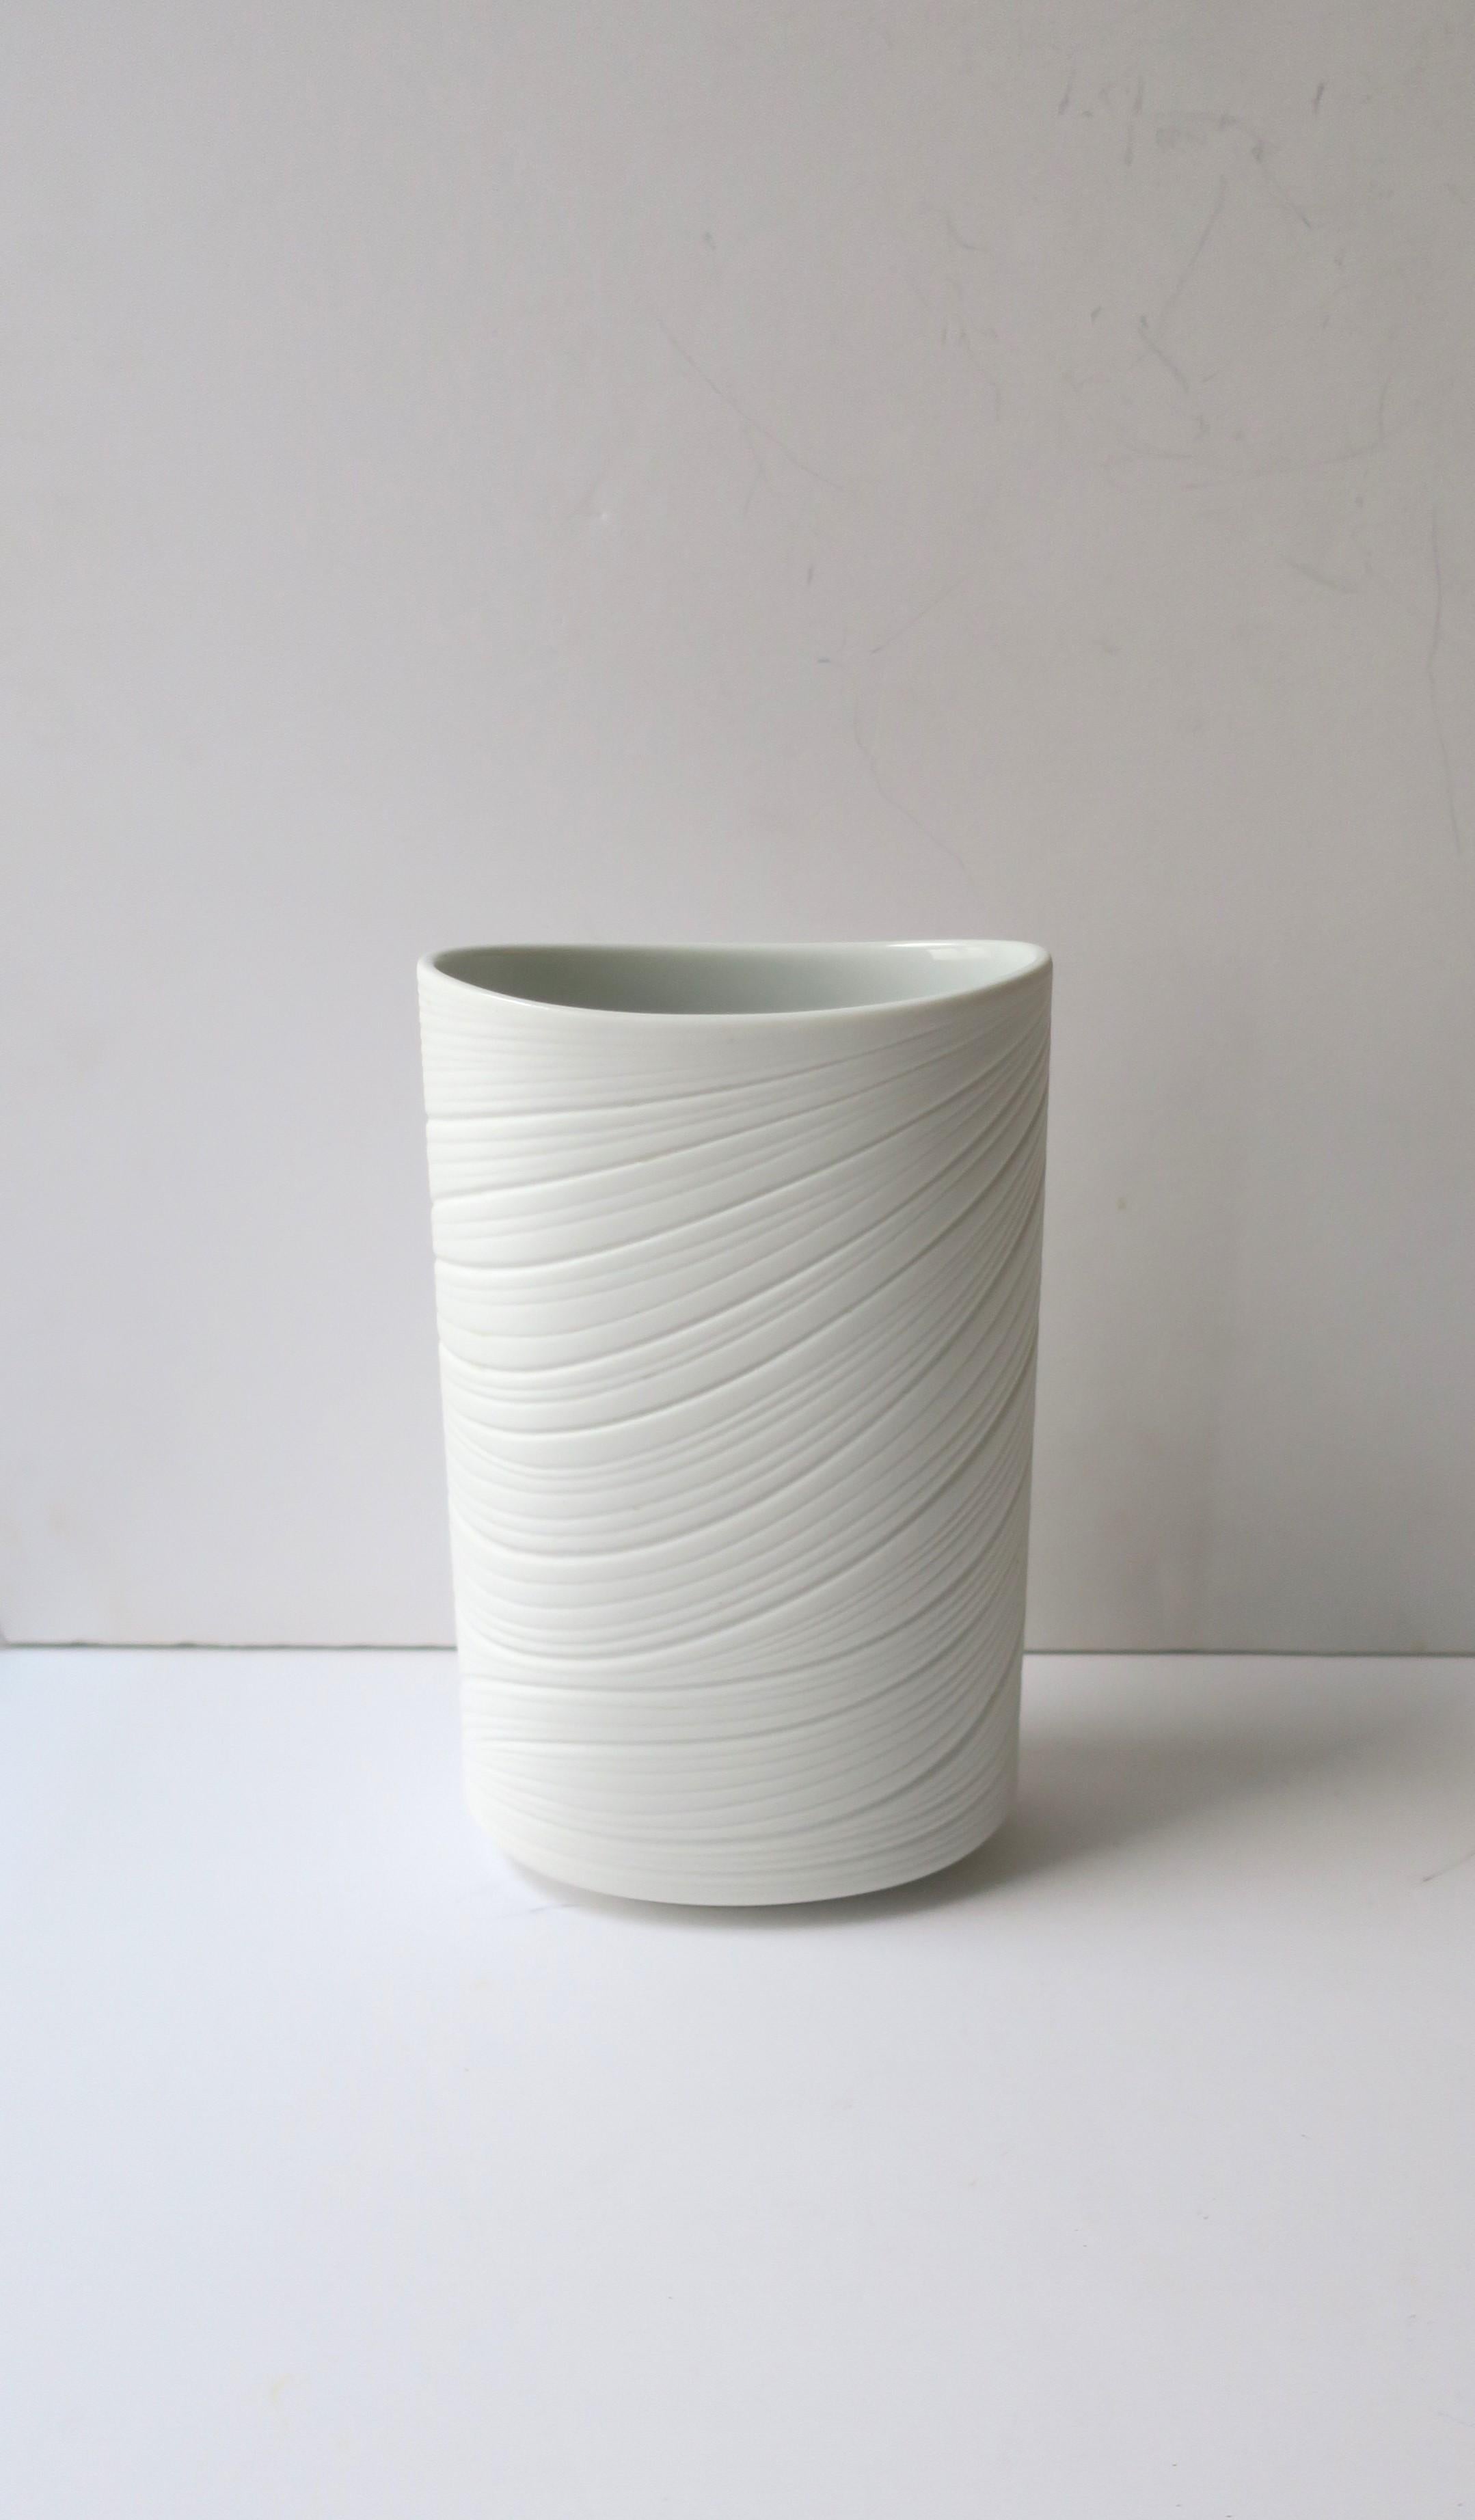 A German white matte porcelain vase by Rosenthal Studio-Line Collection, circa late-20th century, Germany. Oval in shape with organic modern design on around - front, side and back. Maker's mark on bottom as shown in last image. Beautiful with or